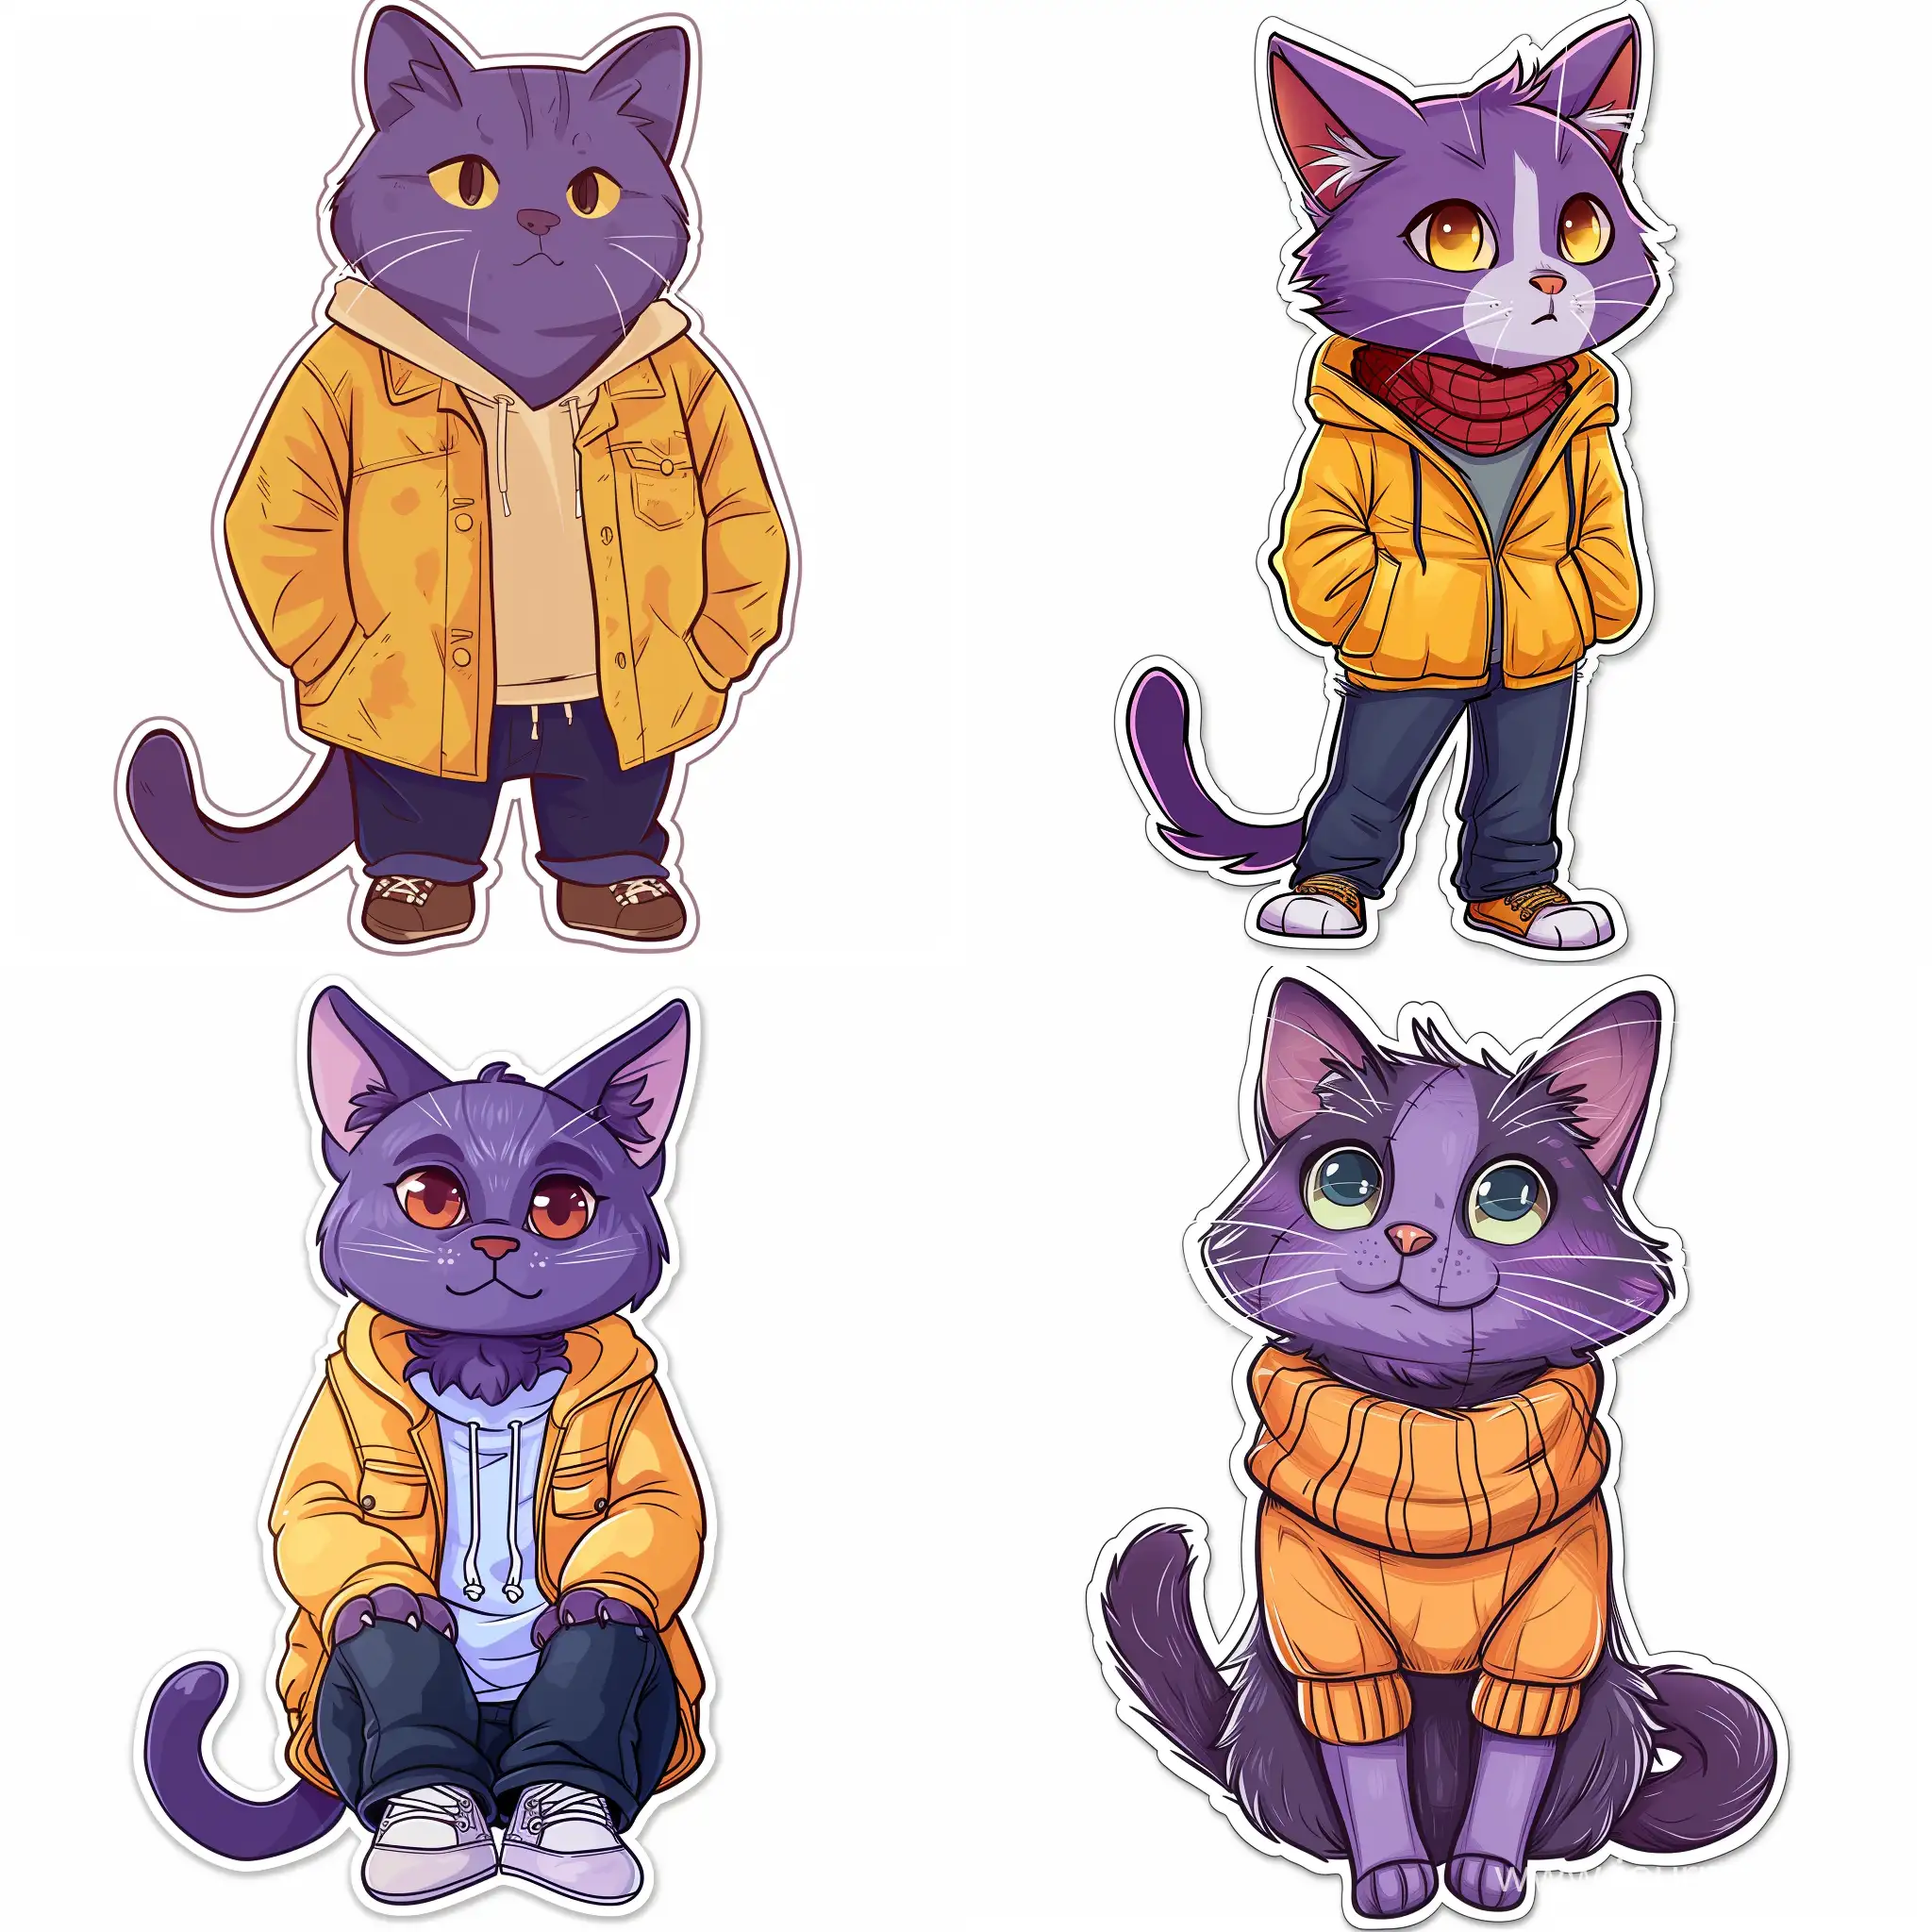 Adorable-Purple-Cat-Sticker-in-Simple-Clothes-Charming-Digital-Illustration